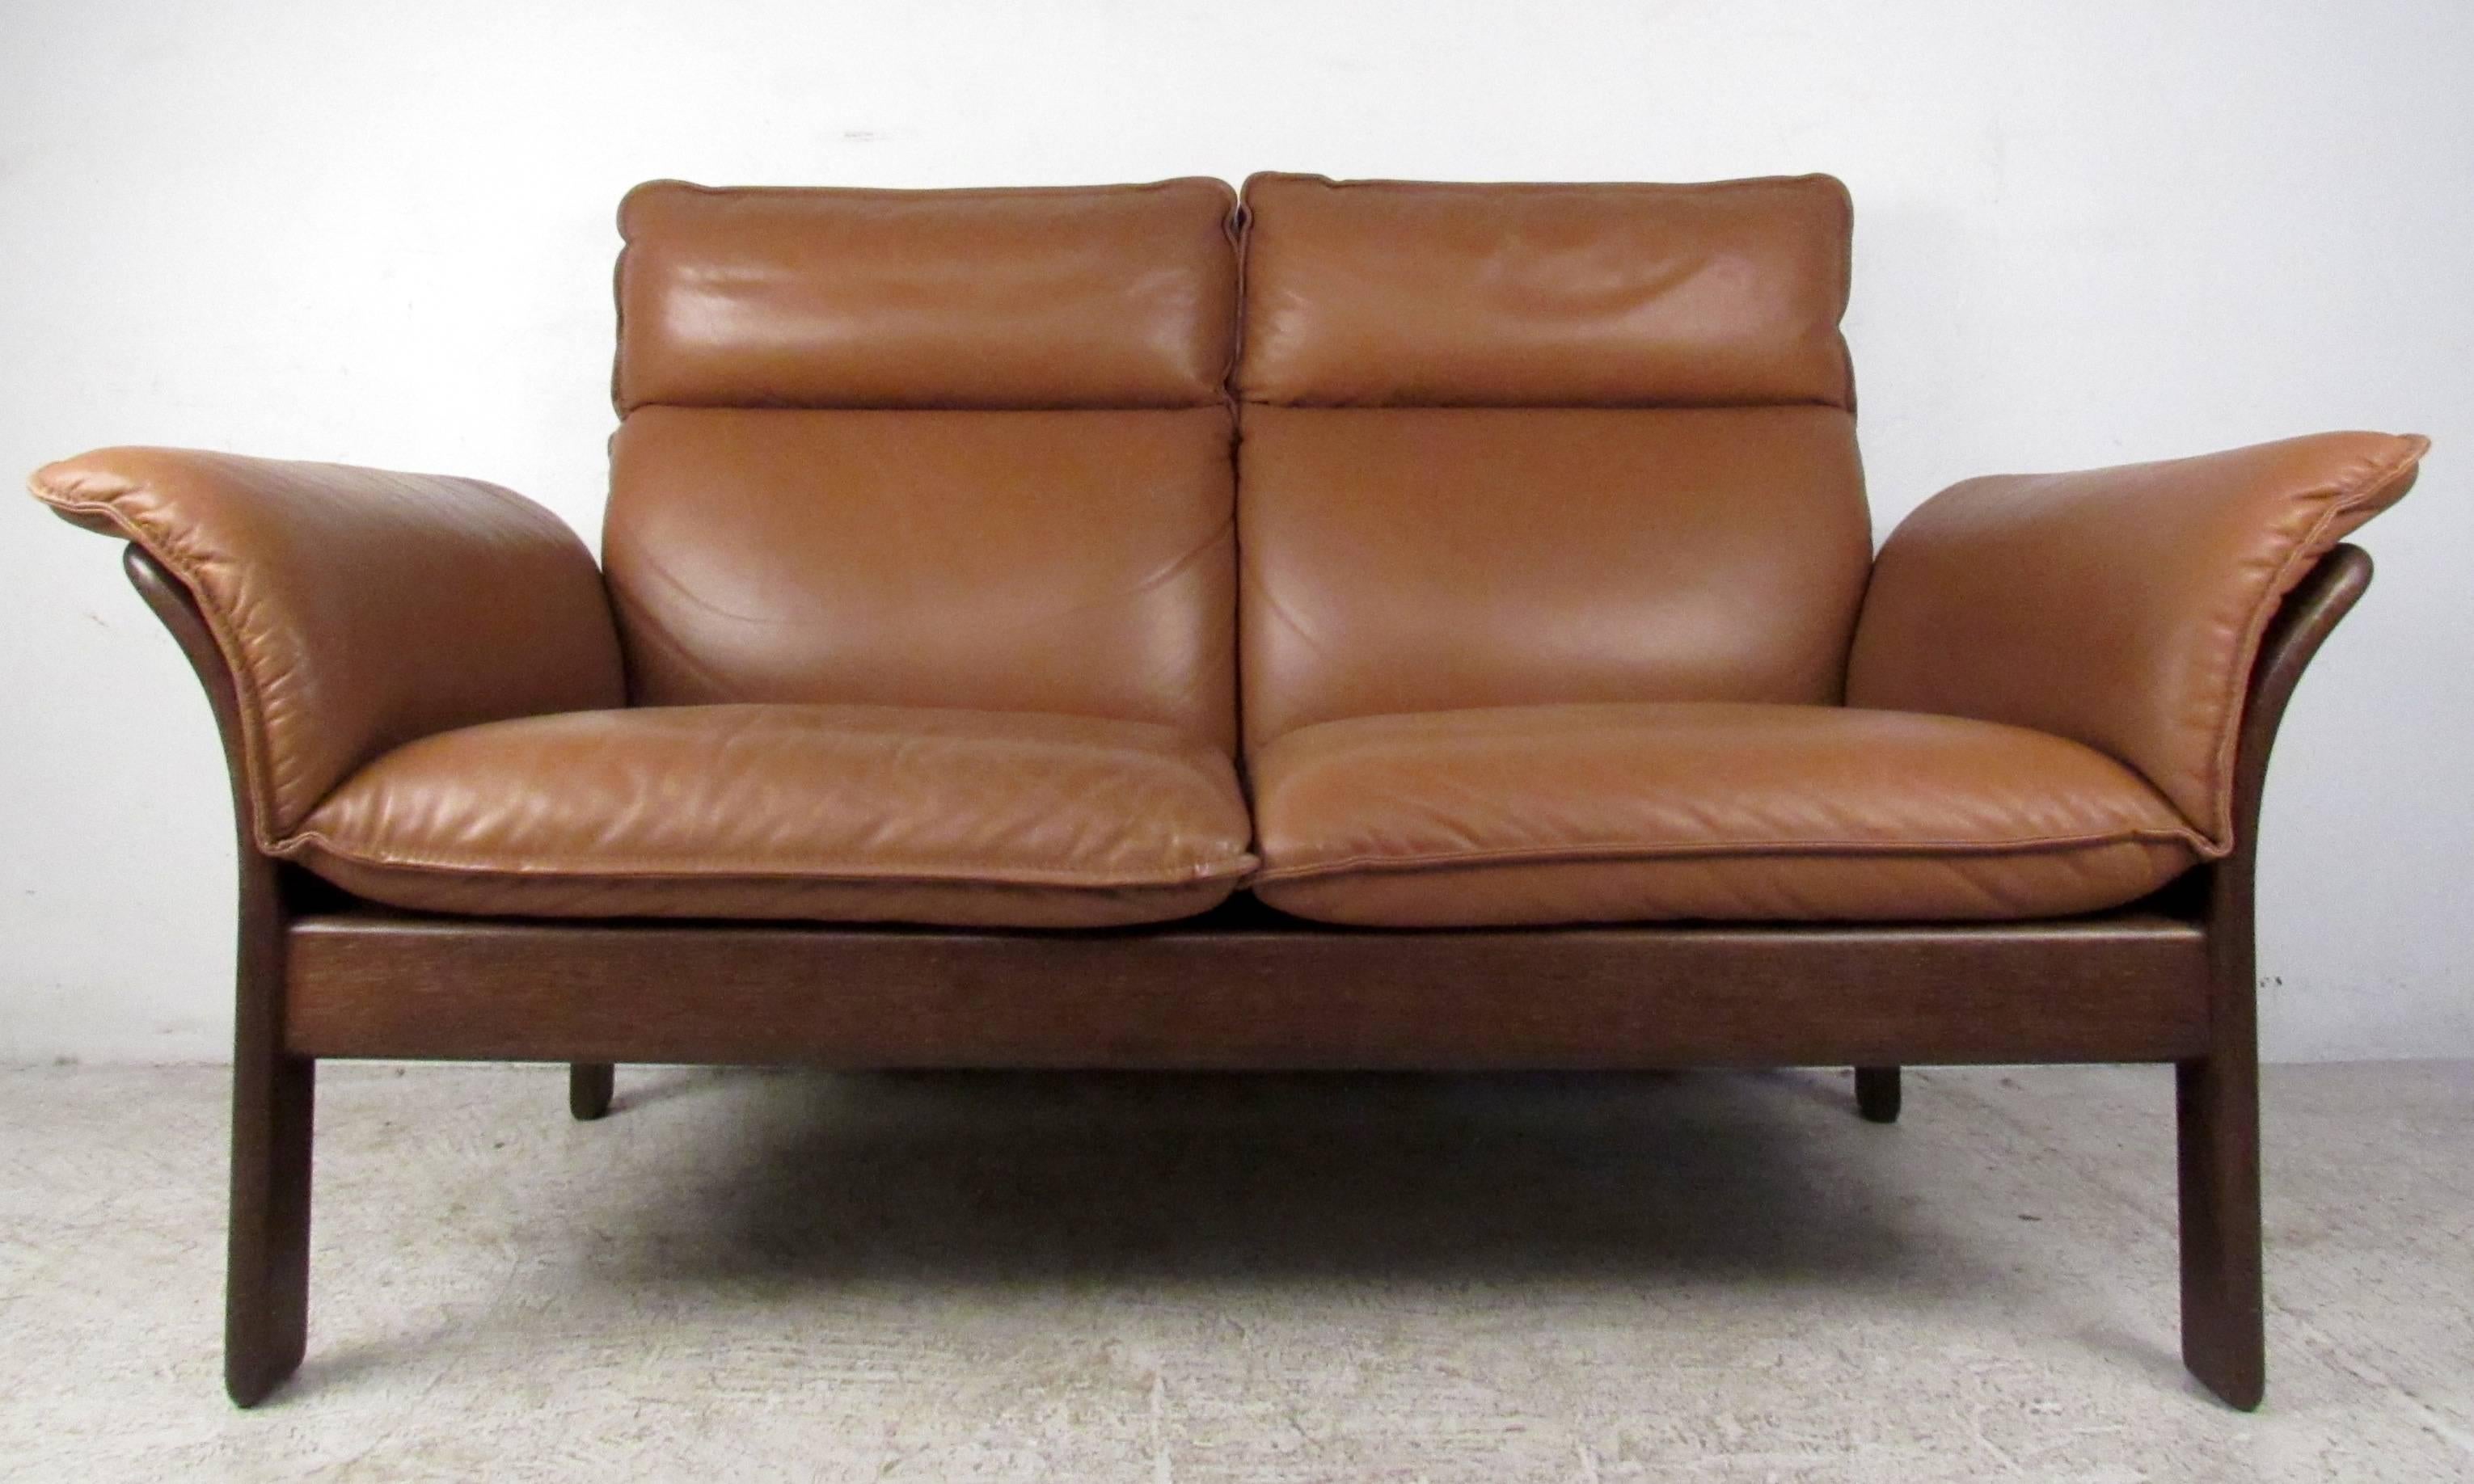 Vintage-modern loveseat featuring sculpted rosewood frame and orange leather upholstery. A sleek design with winged arm rests and beautiful rosewood grain throughout. This stylish and comfortable sofa makes the perfect addition to any home,